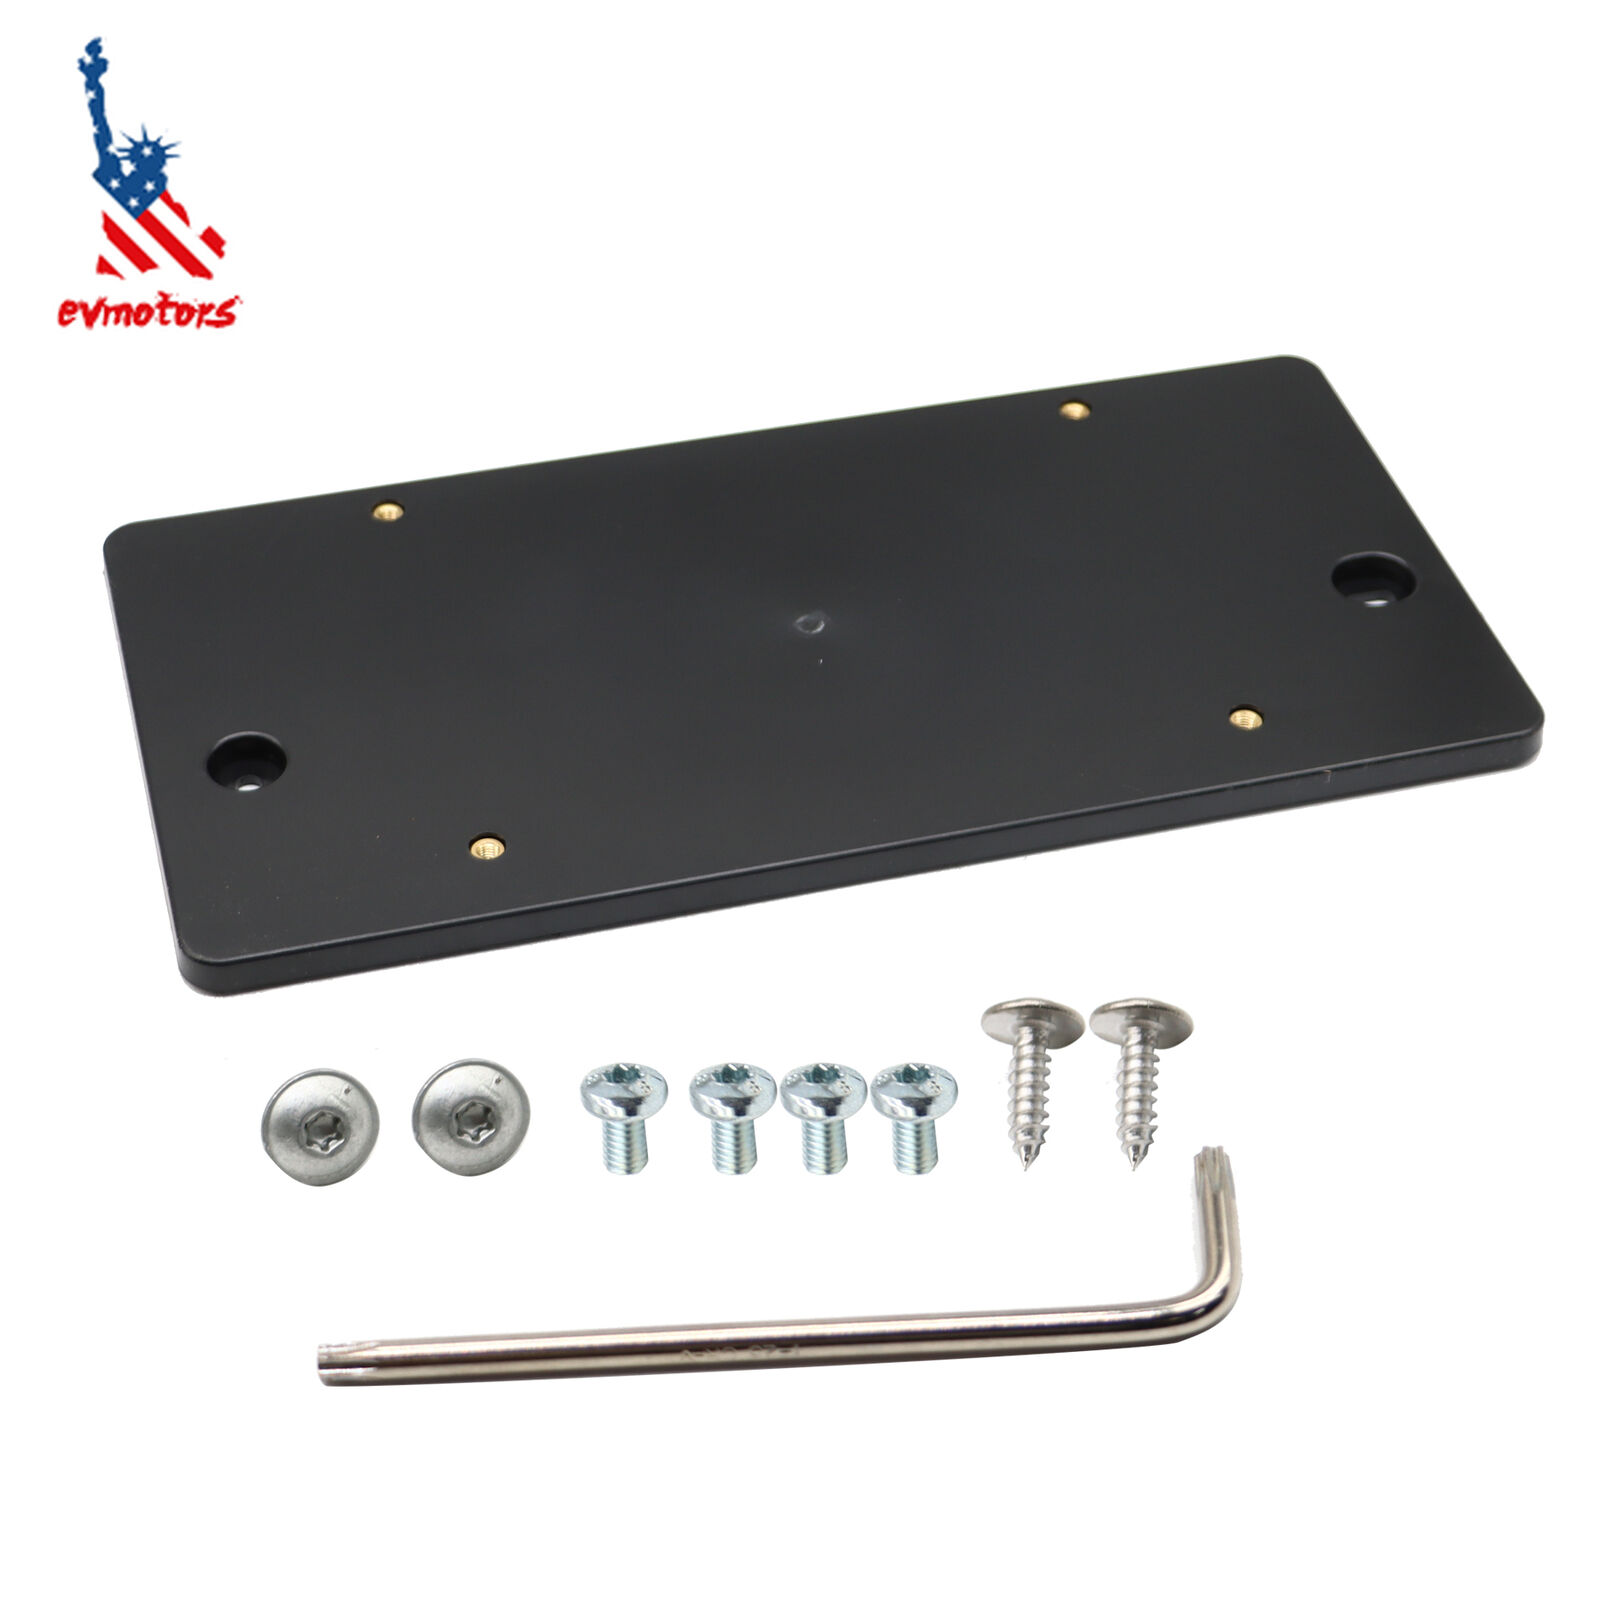 Rear License Plate Tag Bracket With Screws For Audi A3 A4 A5 S3 S4 S5 Q5 RS5 SQ5